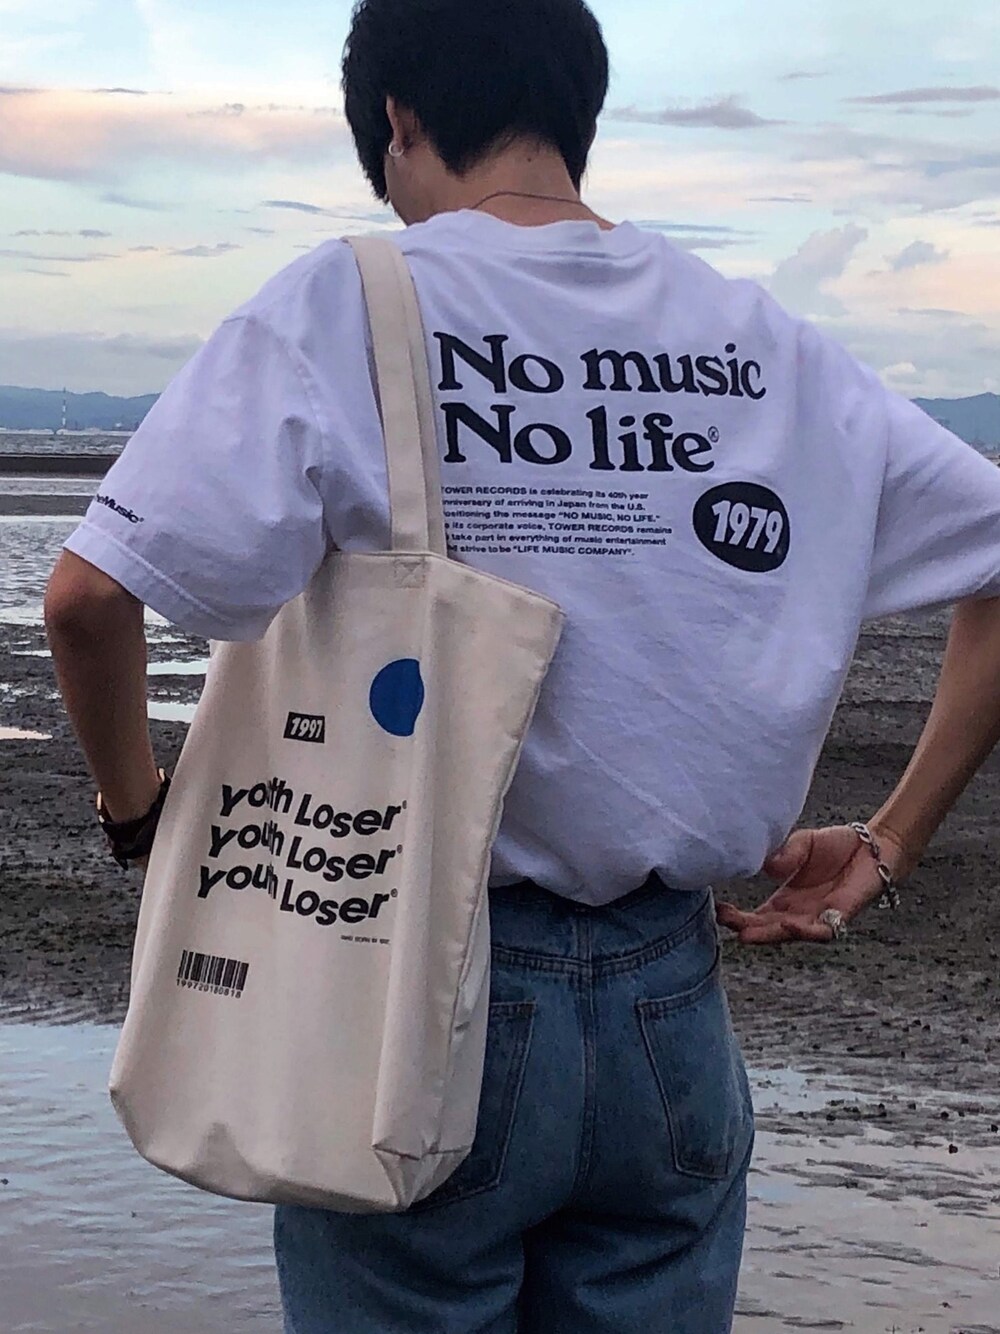 youth loser wear the music